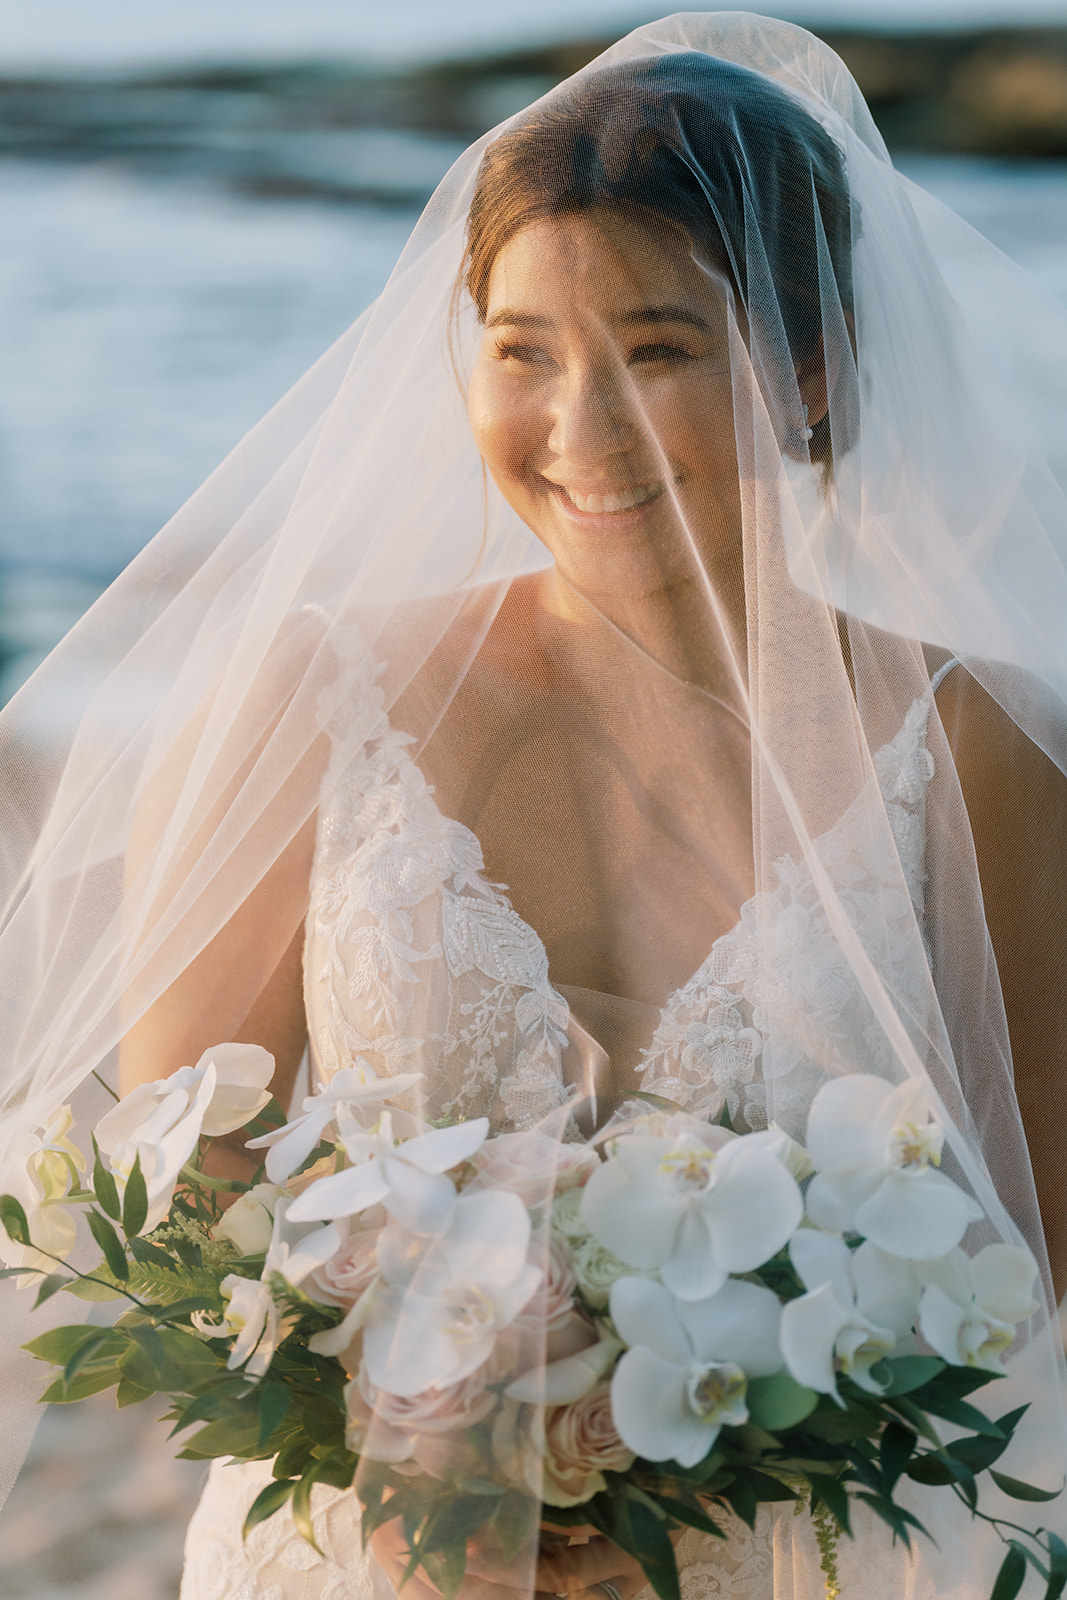 A bride smiles while holding her wedding bouquet on the beach.